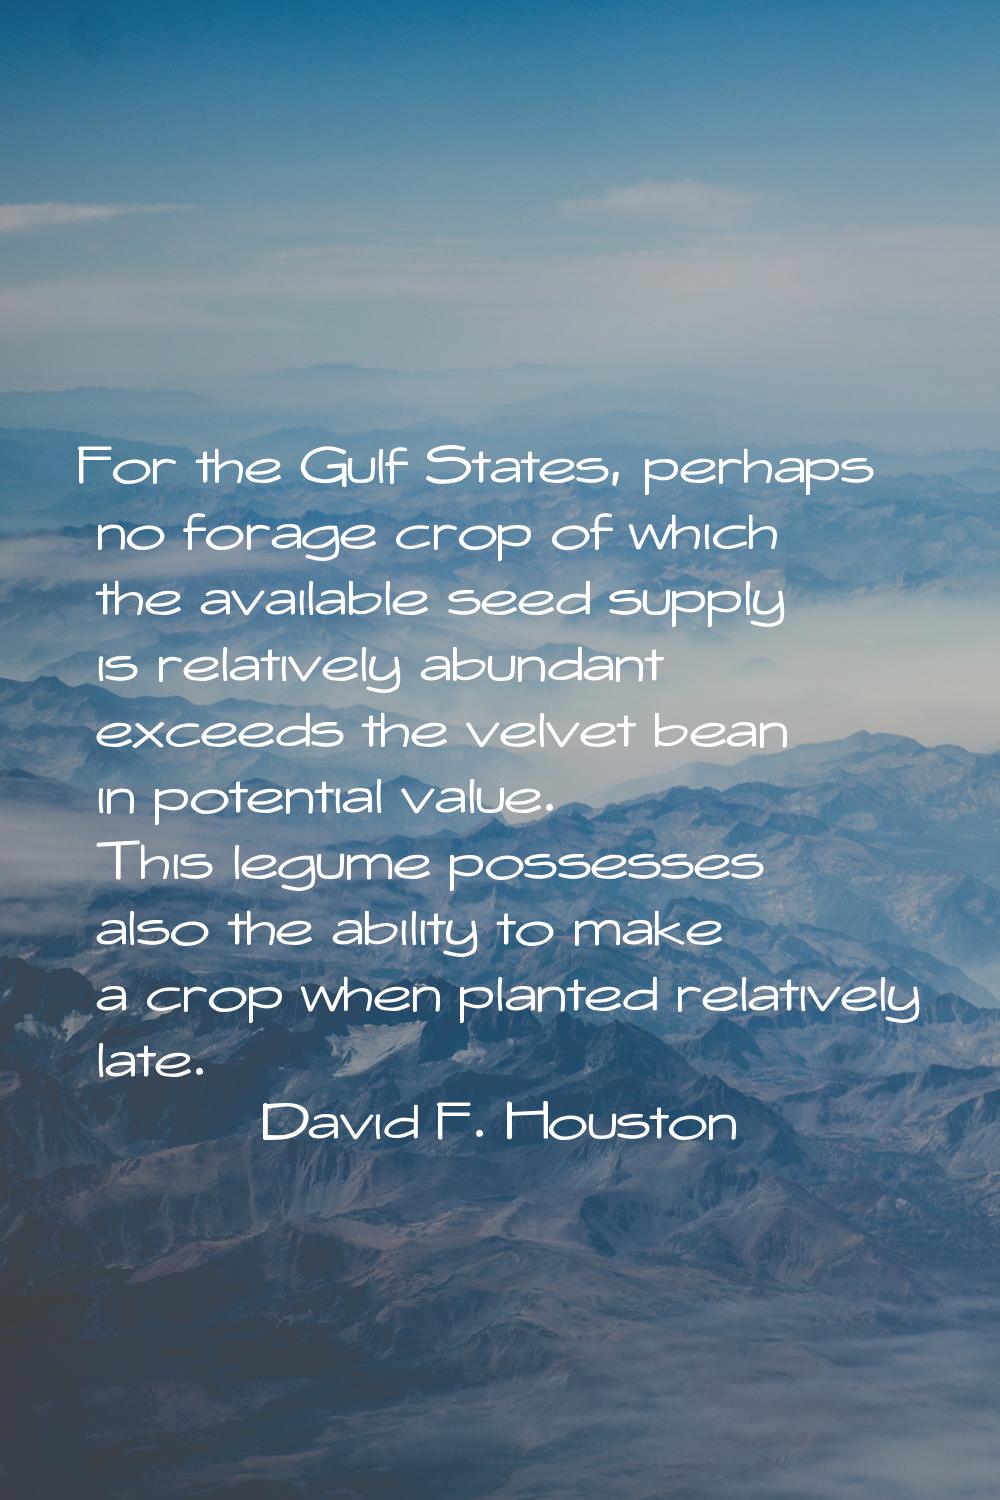 For the Gulf States, perhaps no forage crop of which the available seed supply is relatively abunda